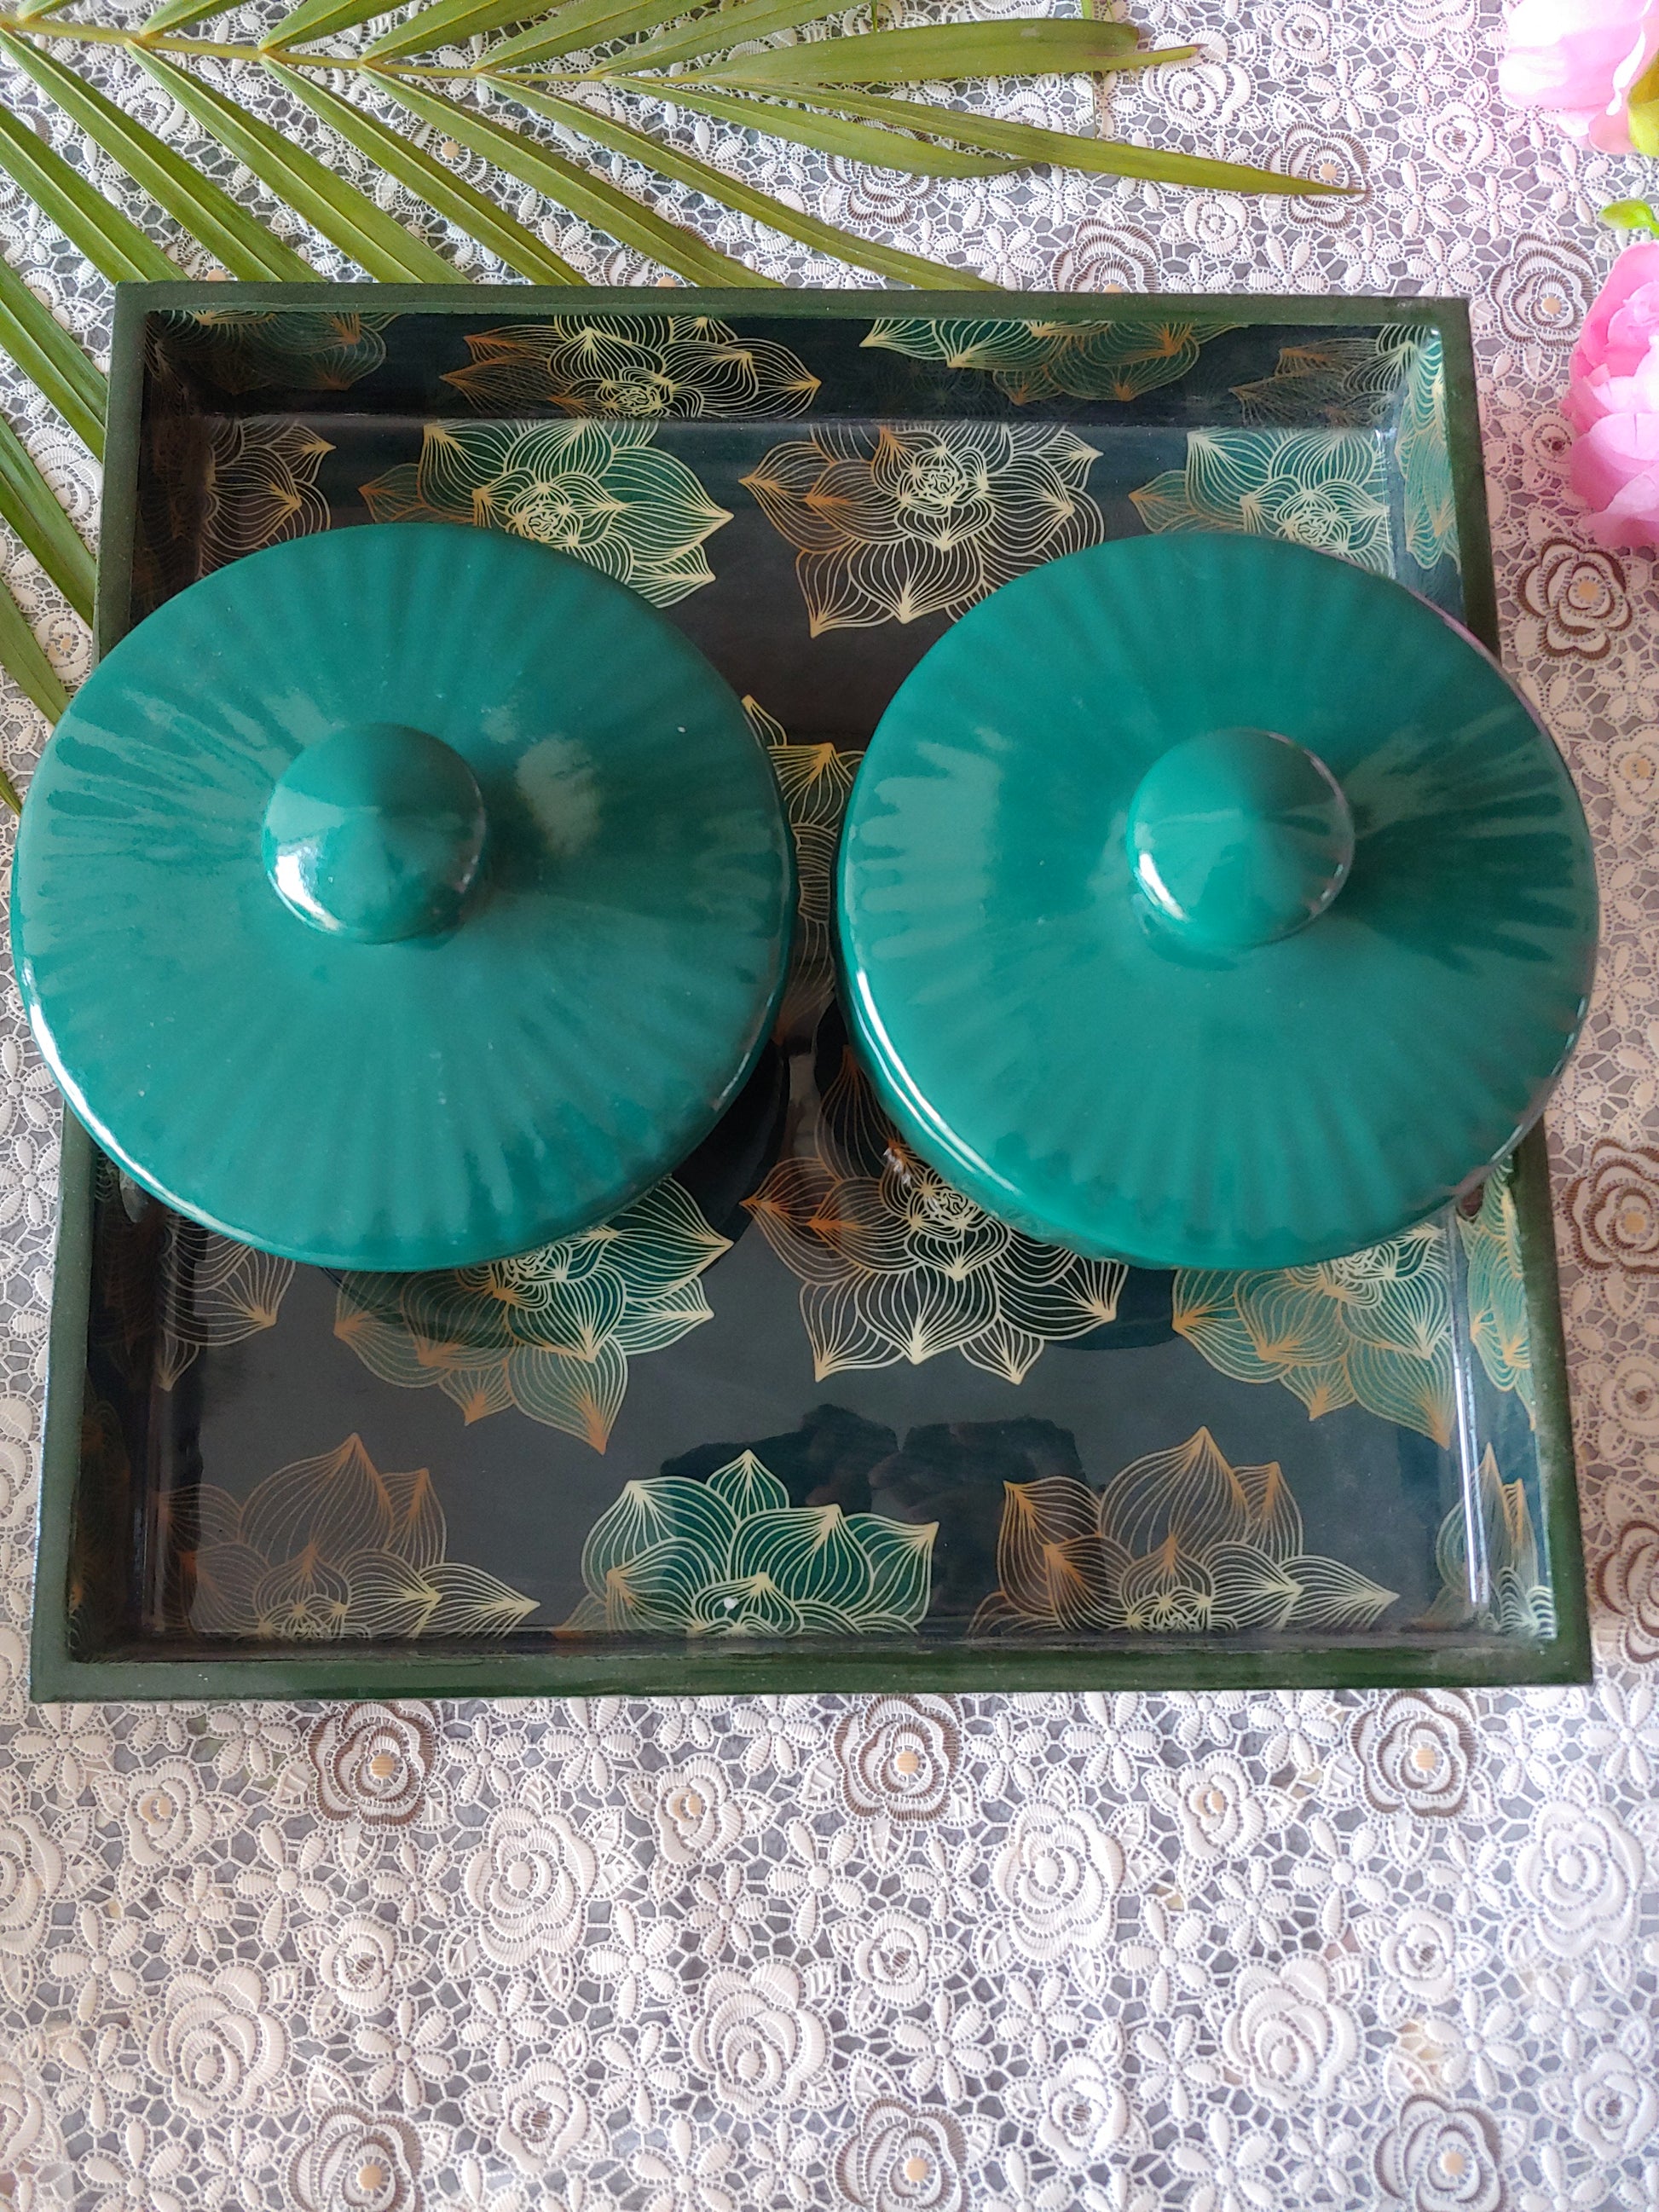 Green ceramic Nesting Bowls with Lid Tray